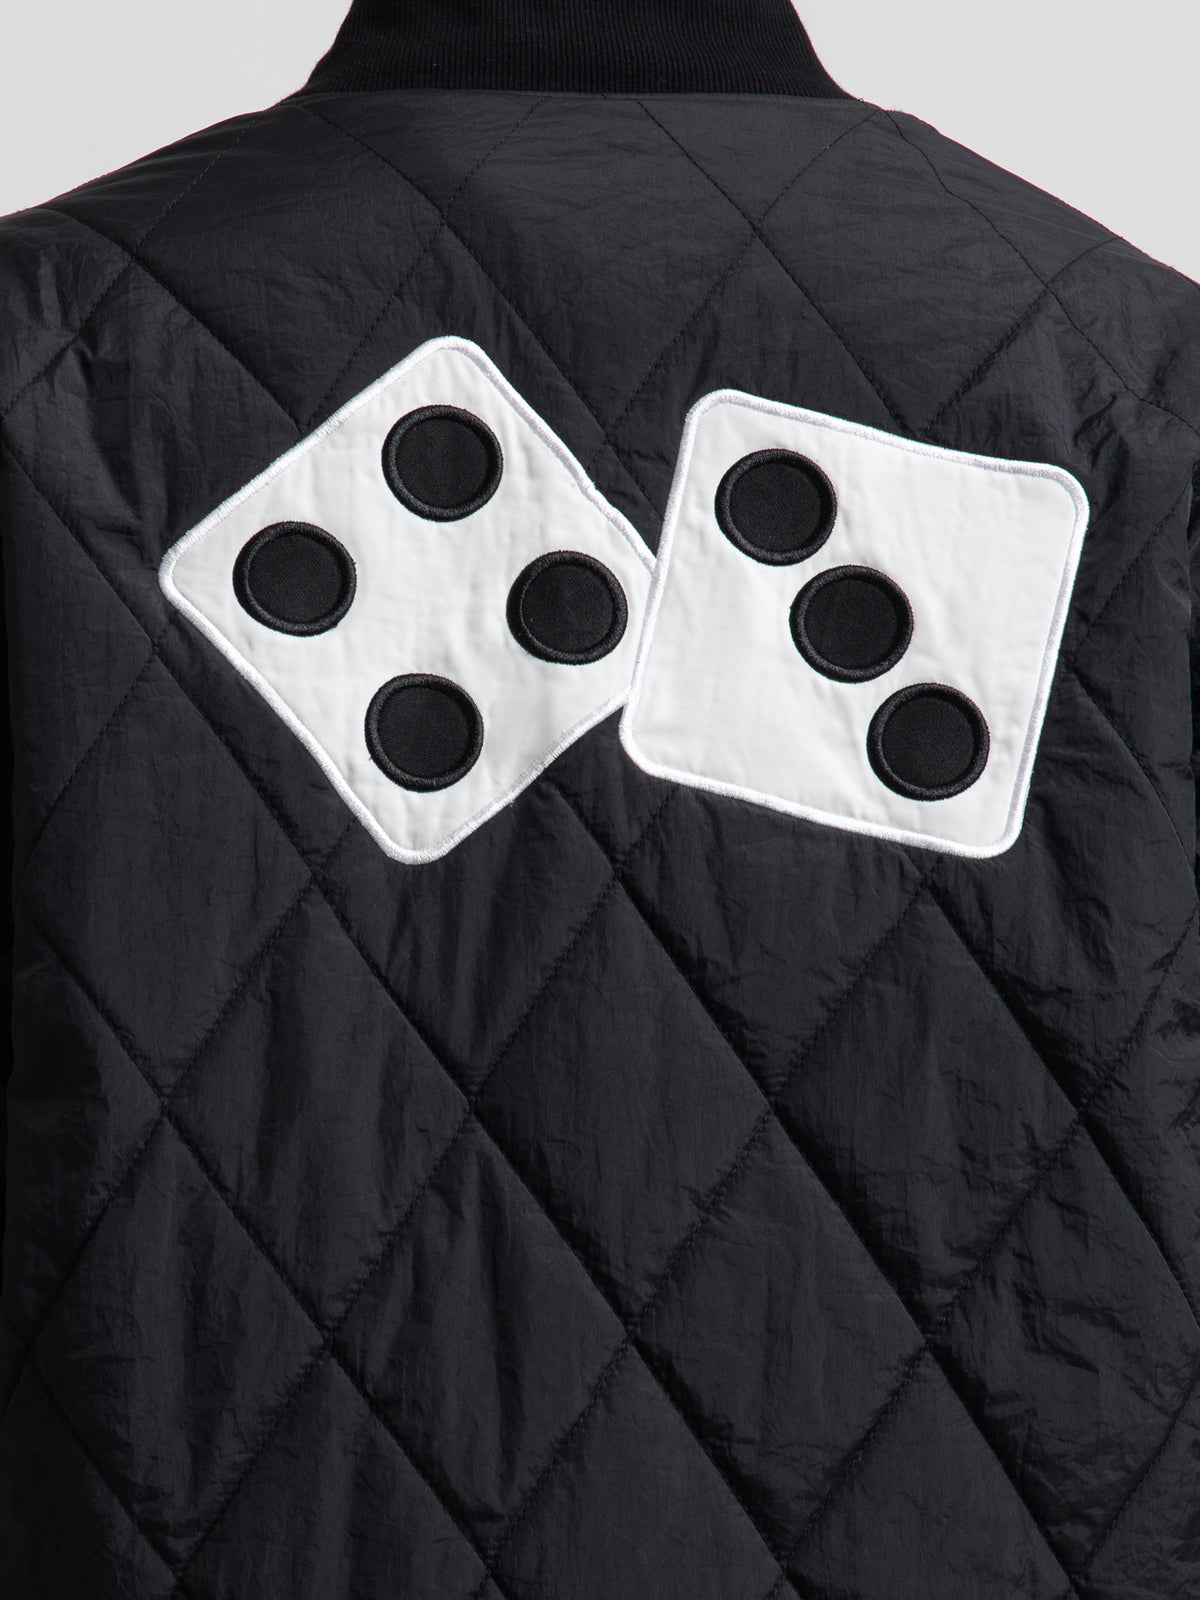 Dice Quilted Jacket in Black